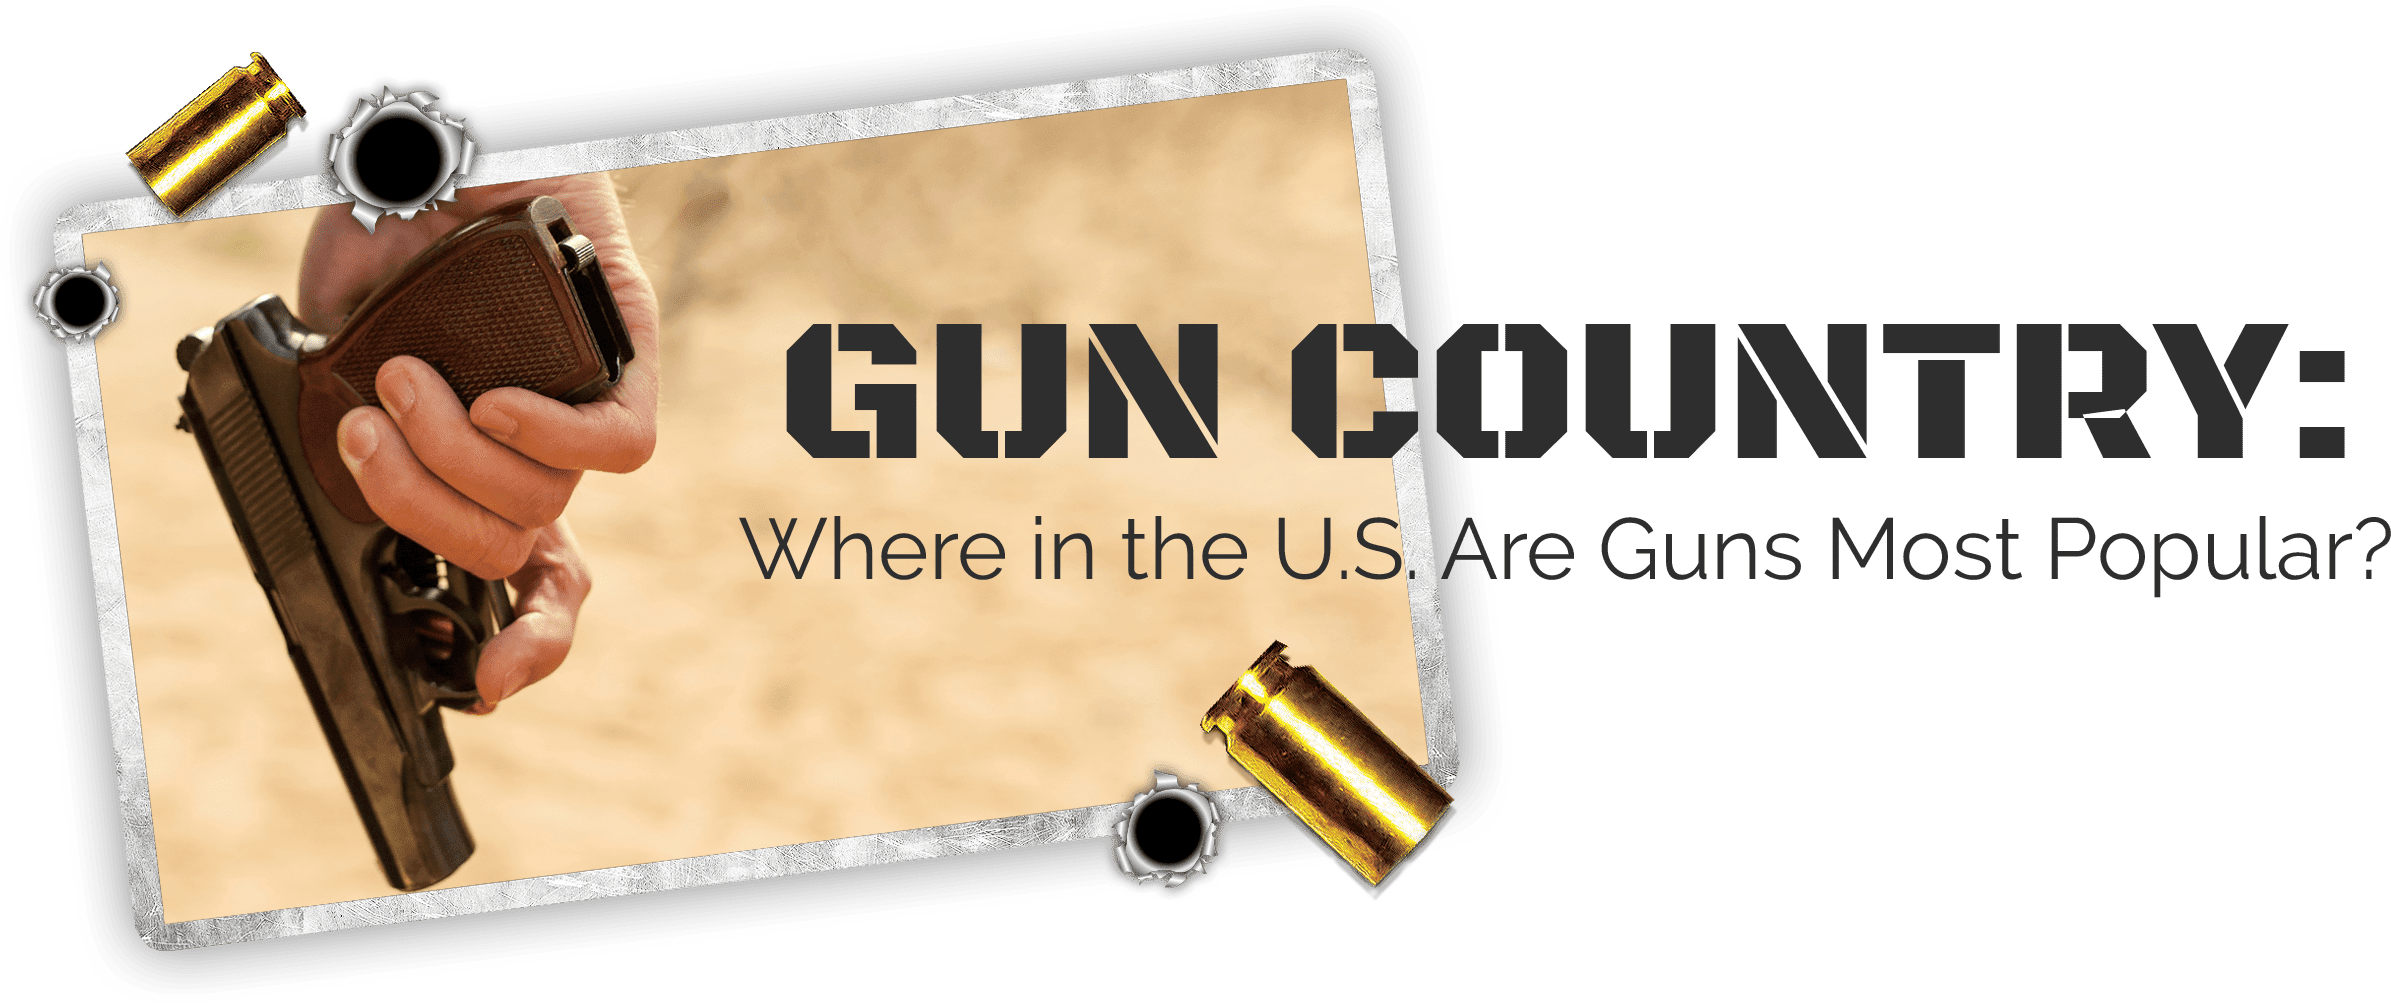 GUN COUNTRY: Where in the U.S. Are Guns Most Popular?